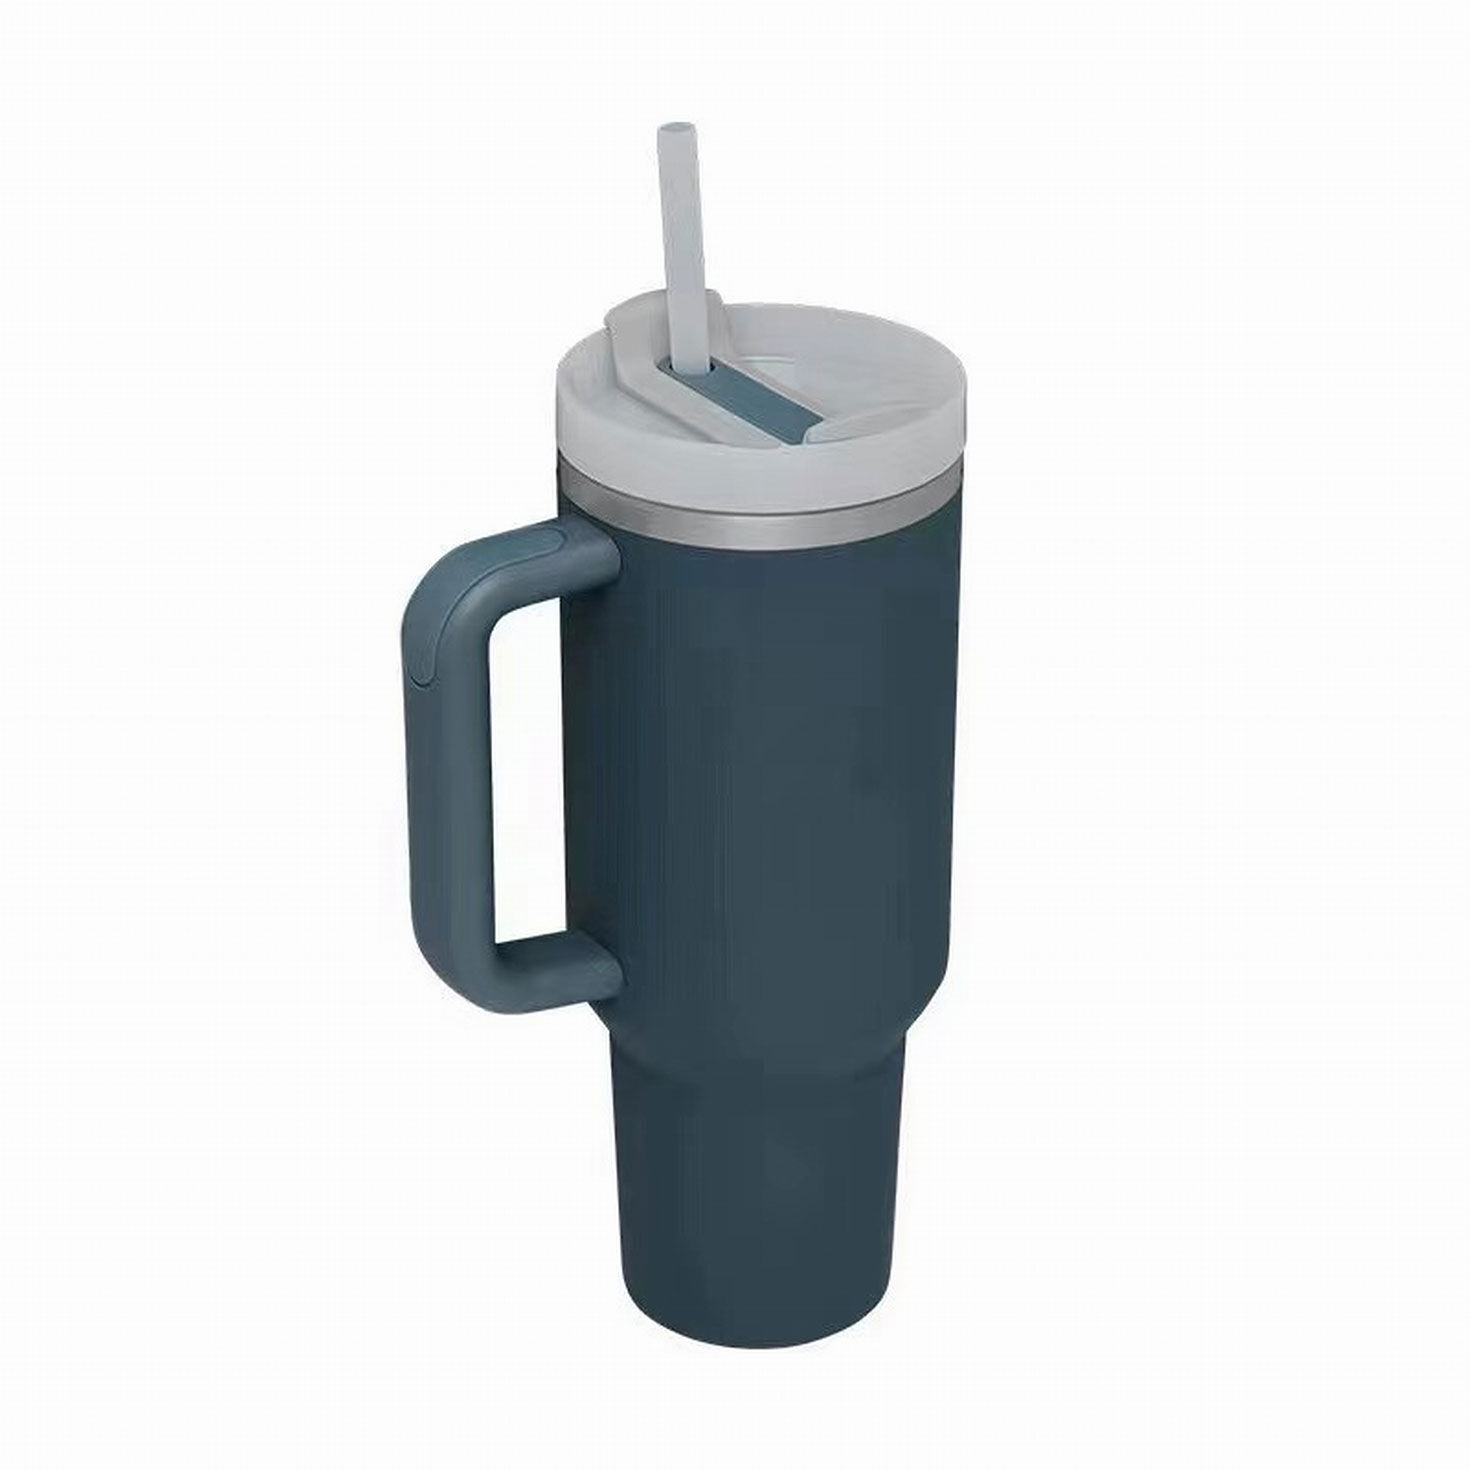 https://www.hallmark.com/dw/image/v2/AALB_PRD/on/demandware.static/-/Sites-hallmark-master/default/dw1ebfca4e/images/finished-goods/products/P28/Navy-Stainless-Steel-Travel-Mug-With-Handle-and-Straw_P28_01.jpg?sfrm=jpg